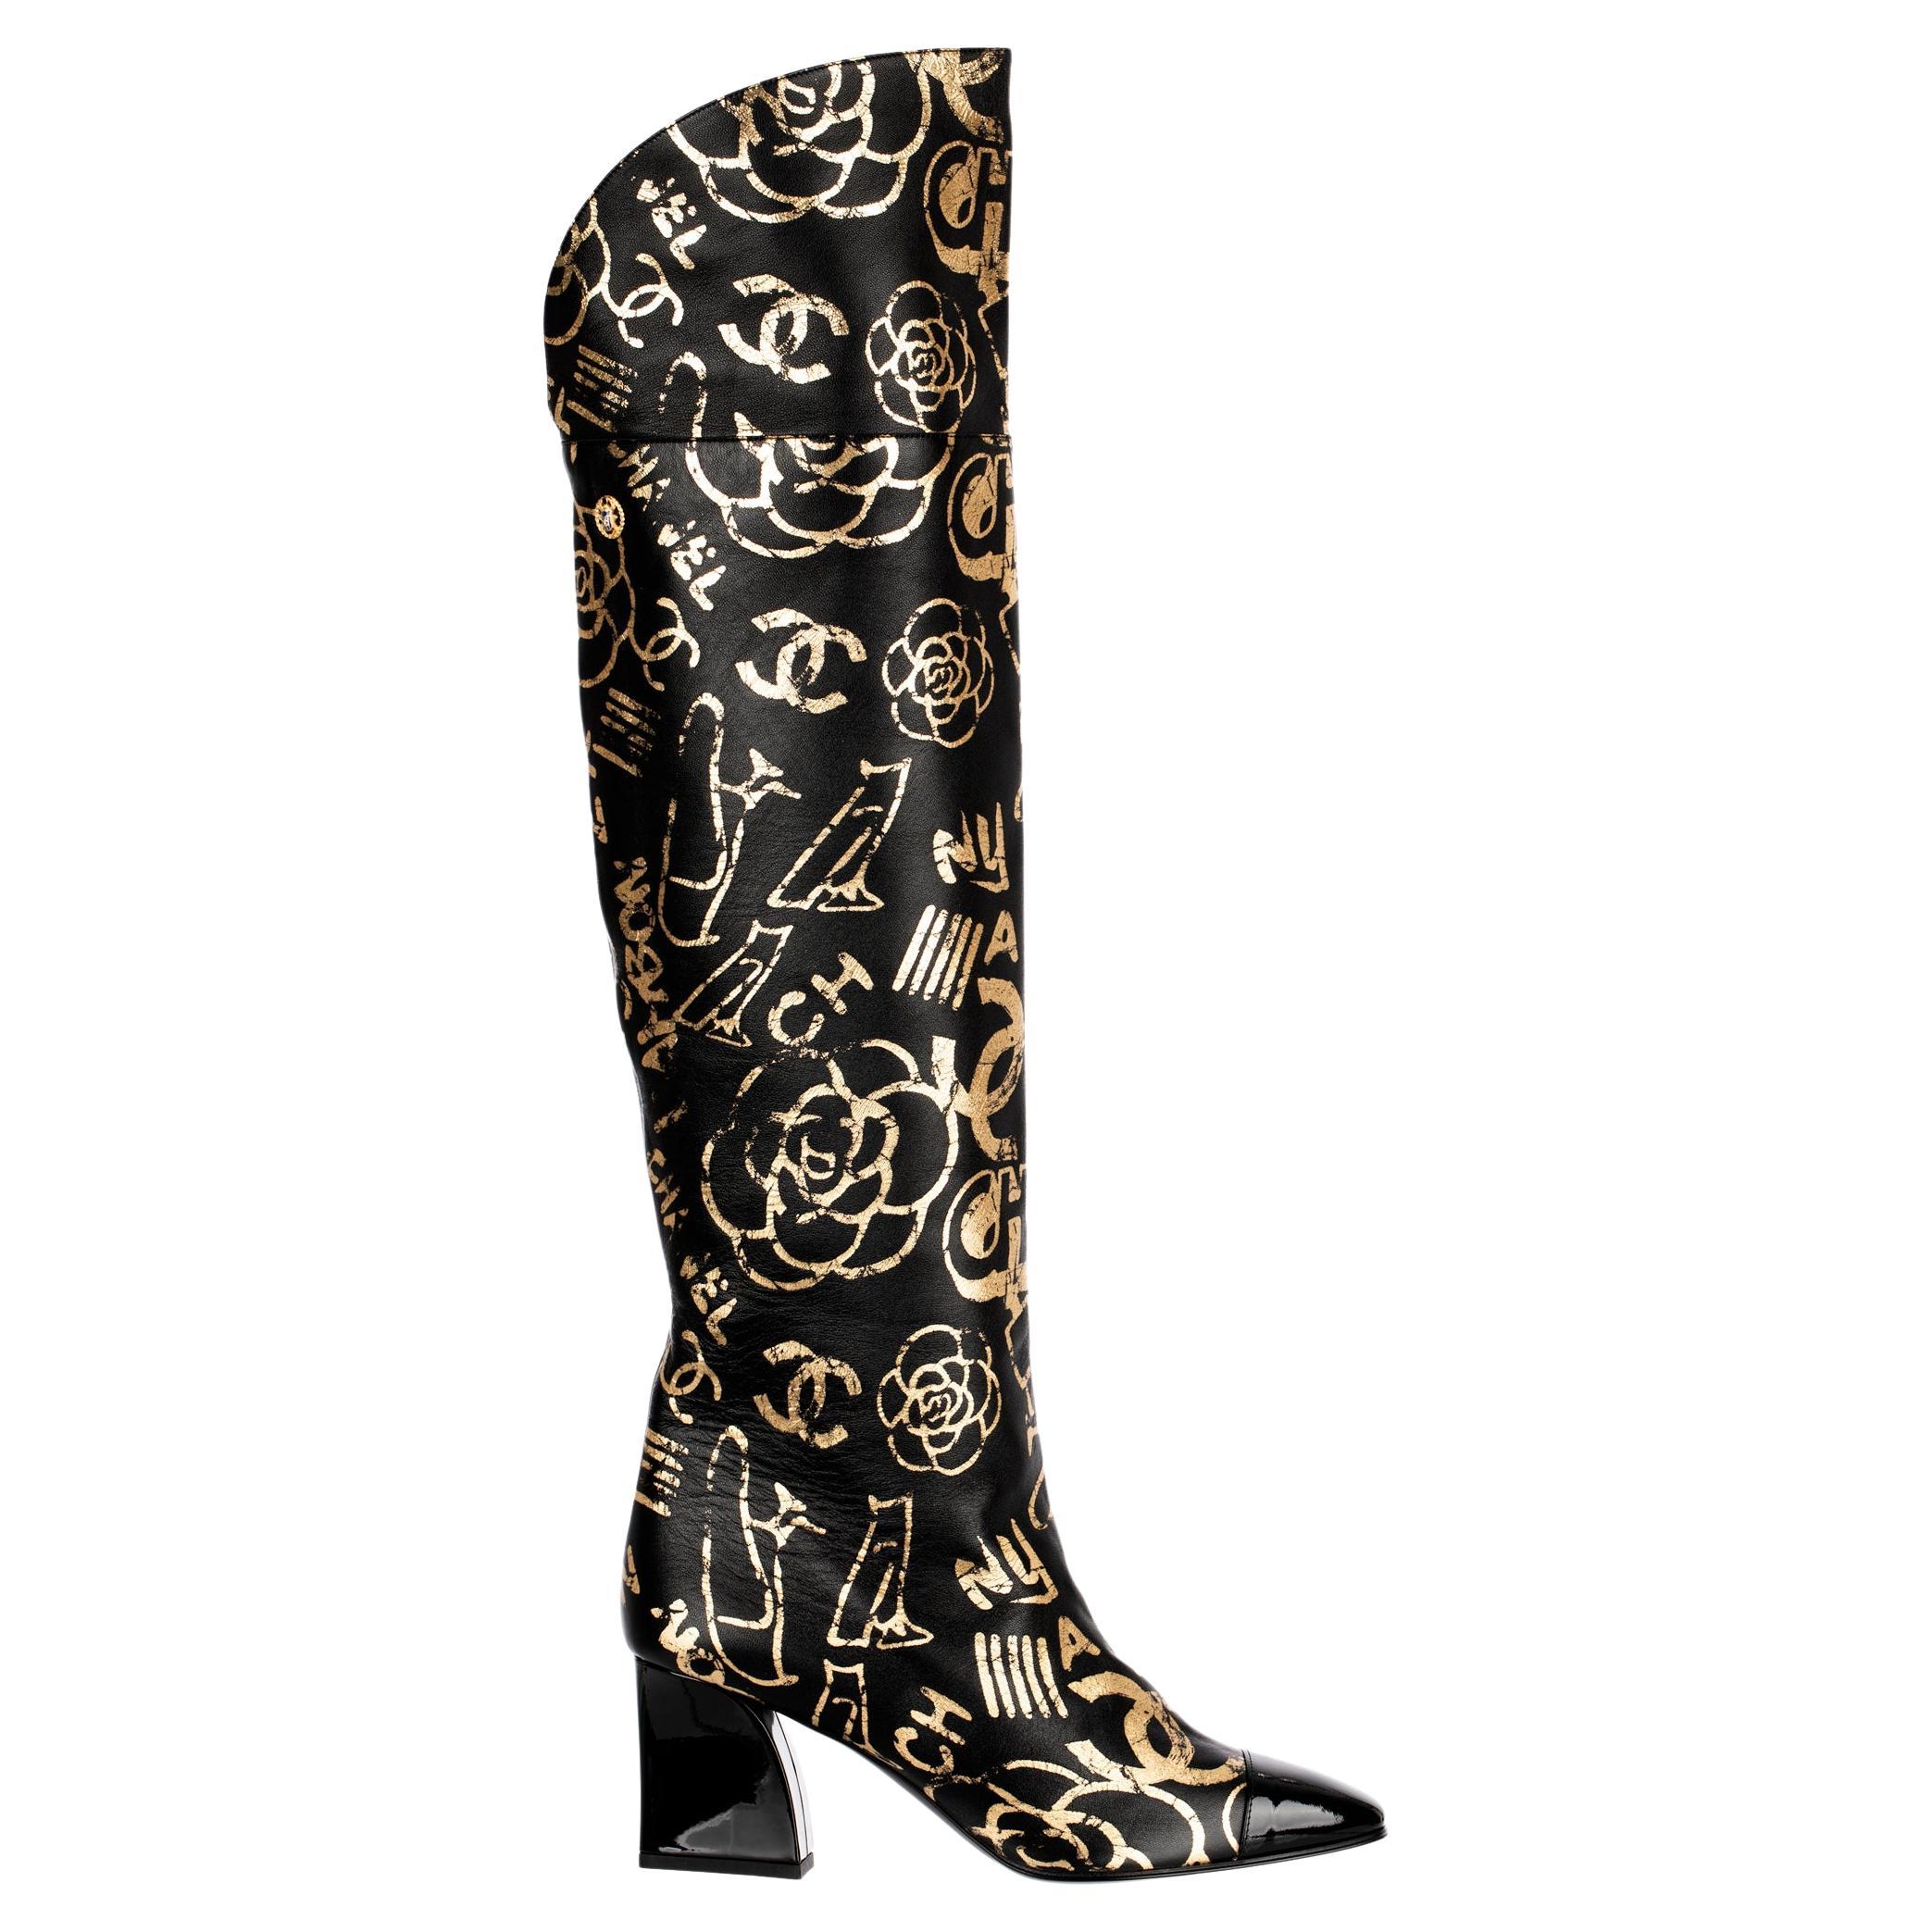 Chanel Thigh High Leather and Tweed Boots, 39